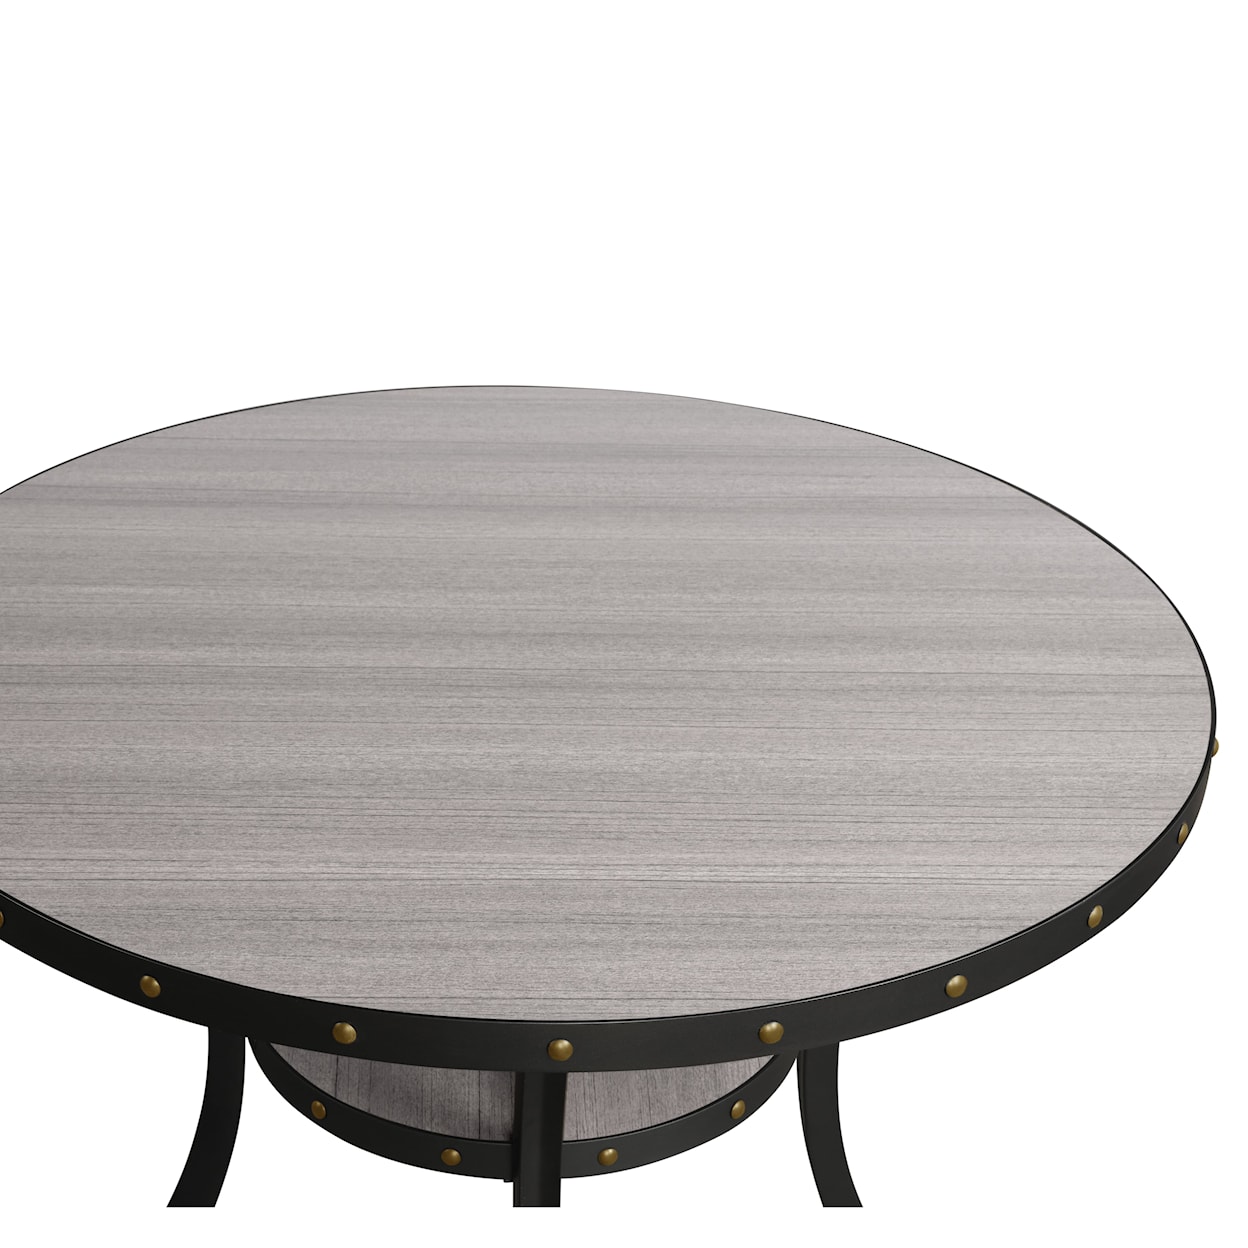 New Classic Crispin Crispin 48" Round Counter Table-Gray